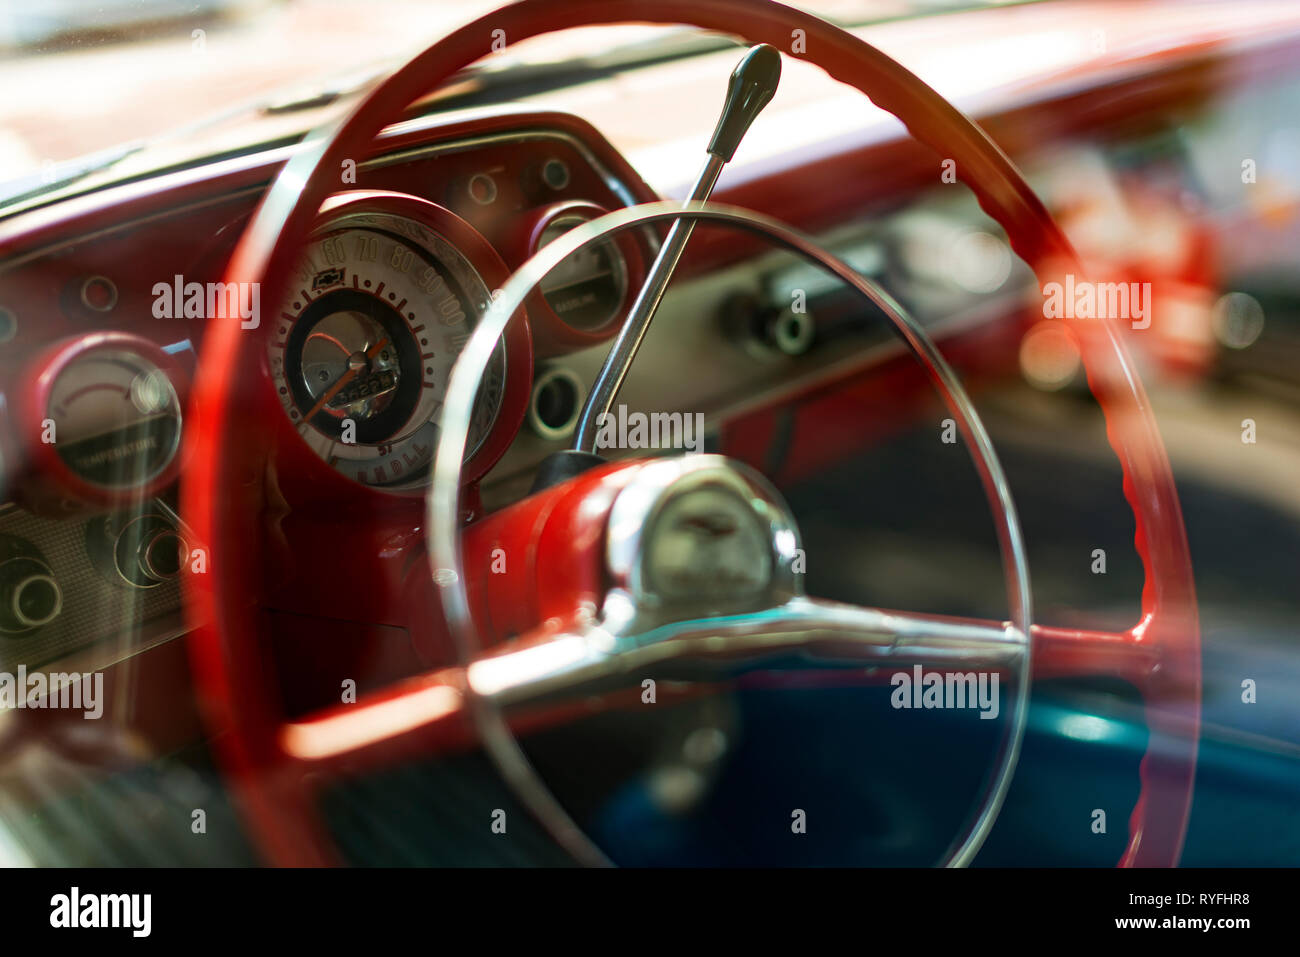 Izmir, Turkey - September 23, 2018: Steering wheel and dashboard view of a Red colored 1957 Chevrolet. Stock Photo